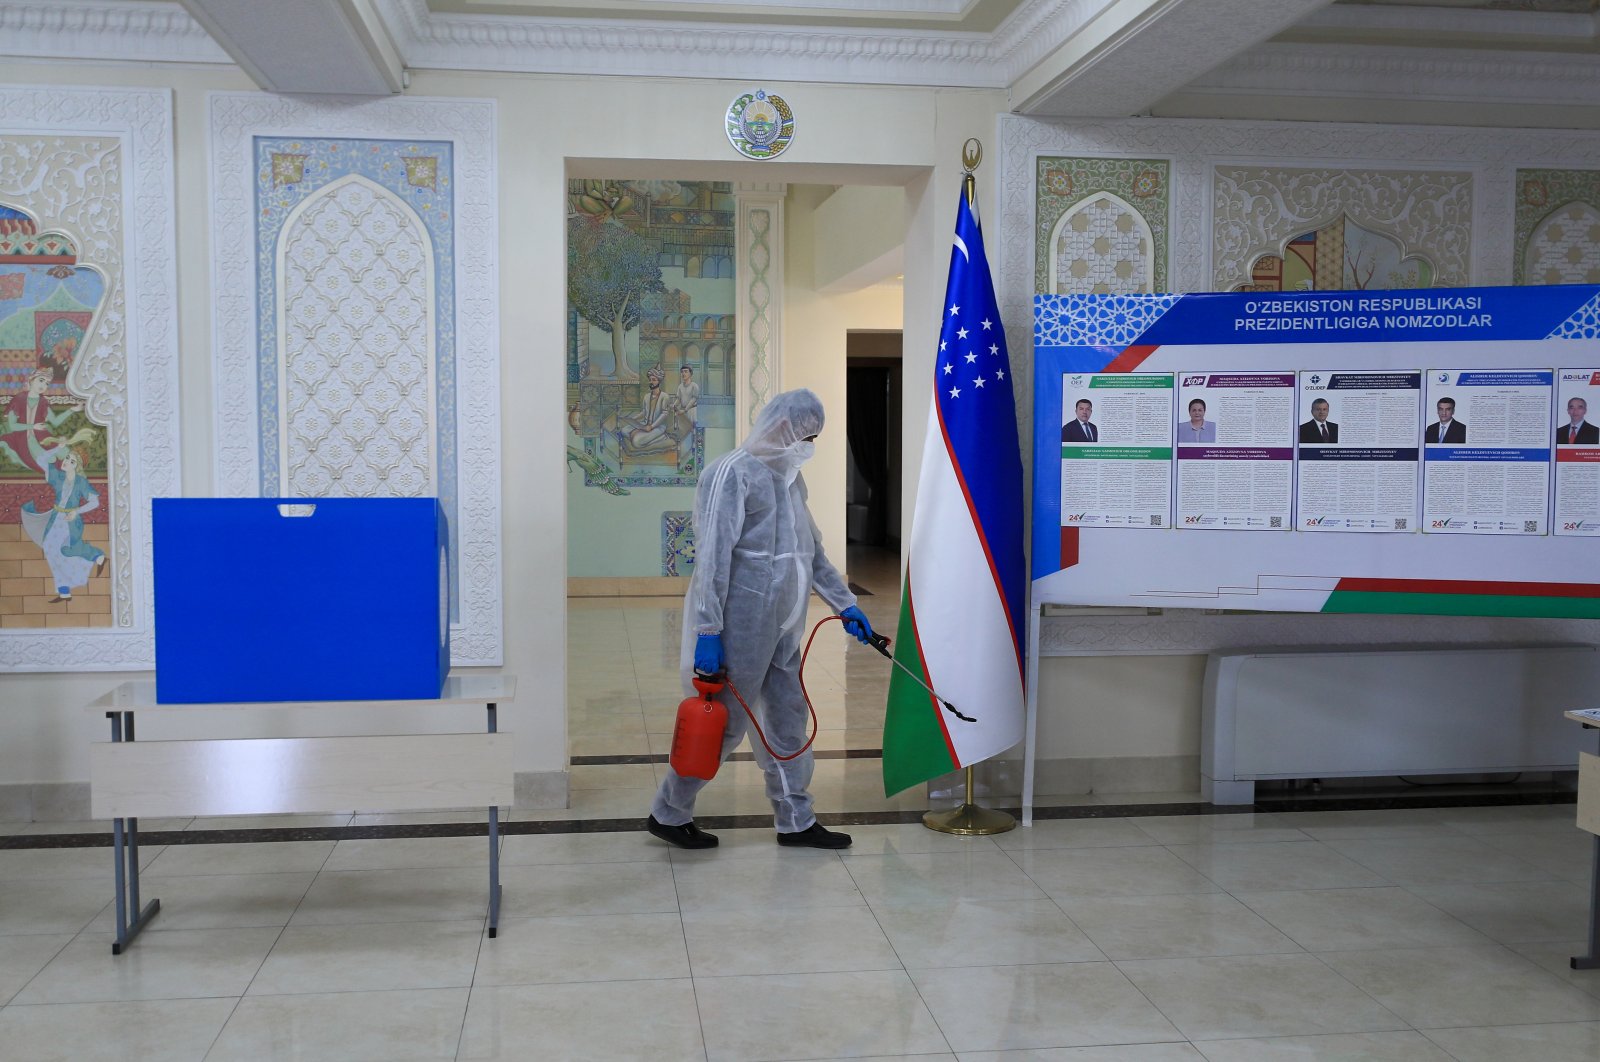 A worker disinfects a polling station ahead of the upcoming 2021 Uzbekistan presidential election scheduled for October 24, Samarkand, Uzbekistan, Oct. 20, 2021. (Reuters Photo)